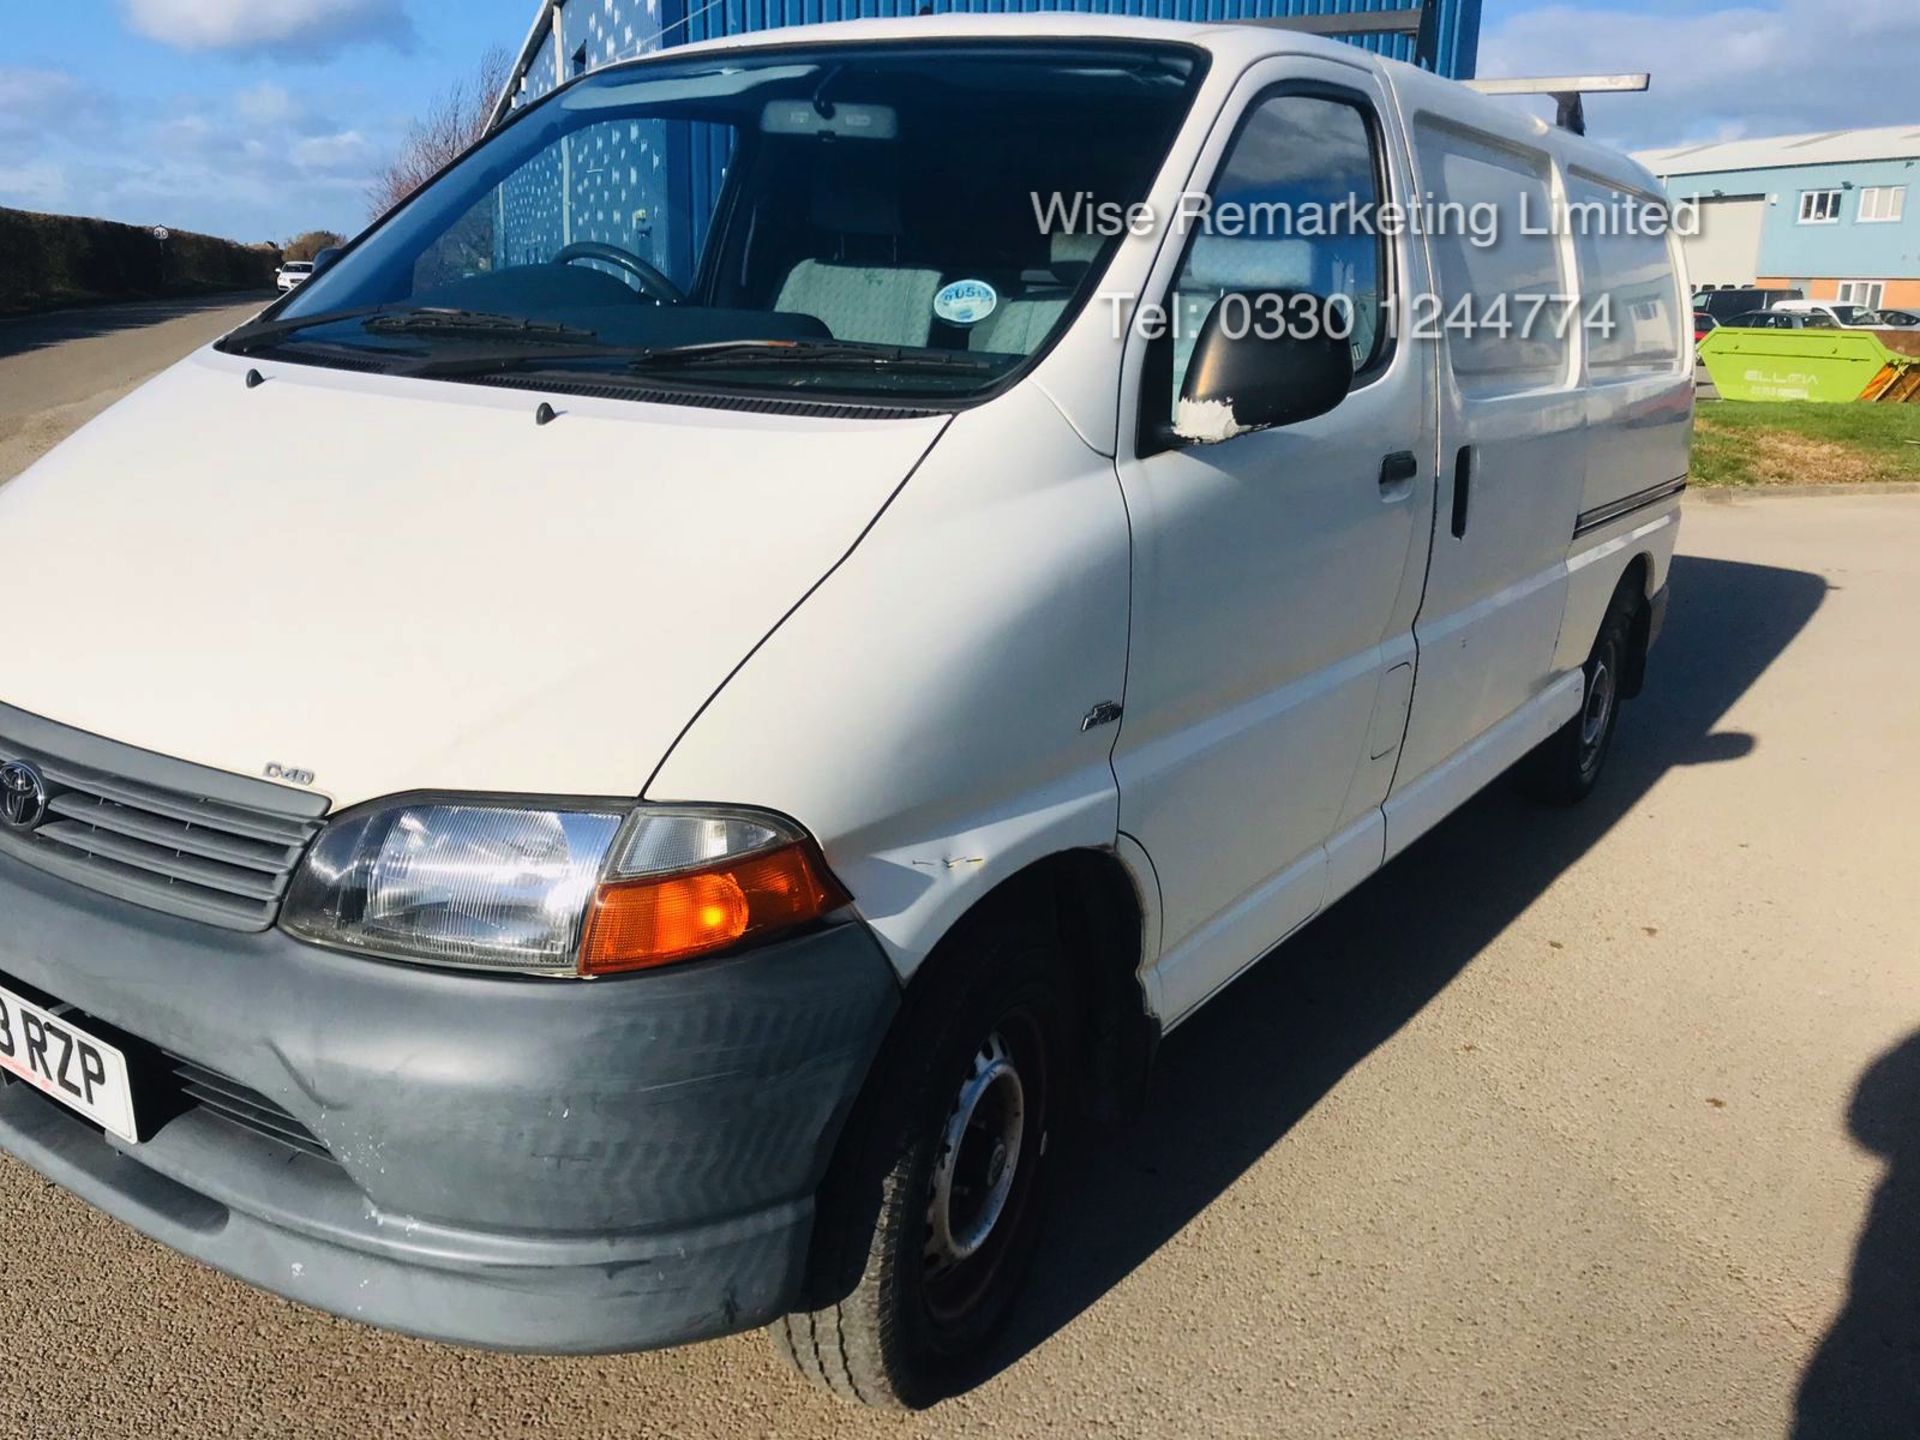 Toyota Hiace 300 GS 2.5 D4D - 2003 03 Reg - 1 Keeper From New - 3 Seater - Roof Rack